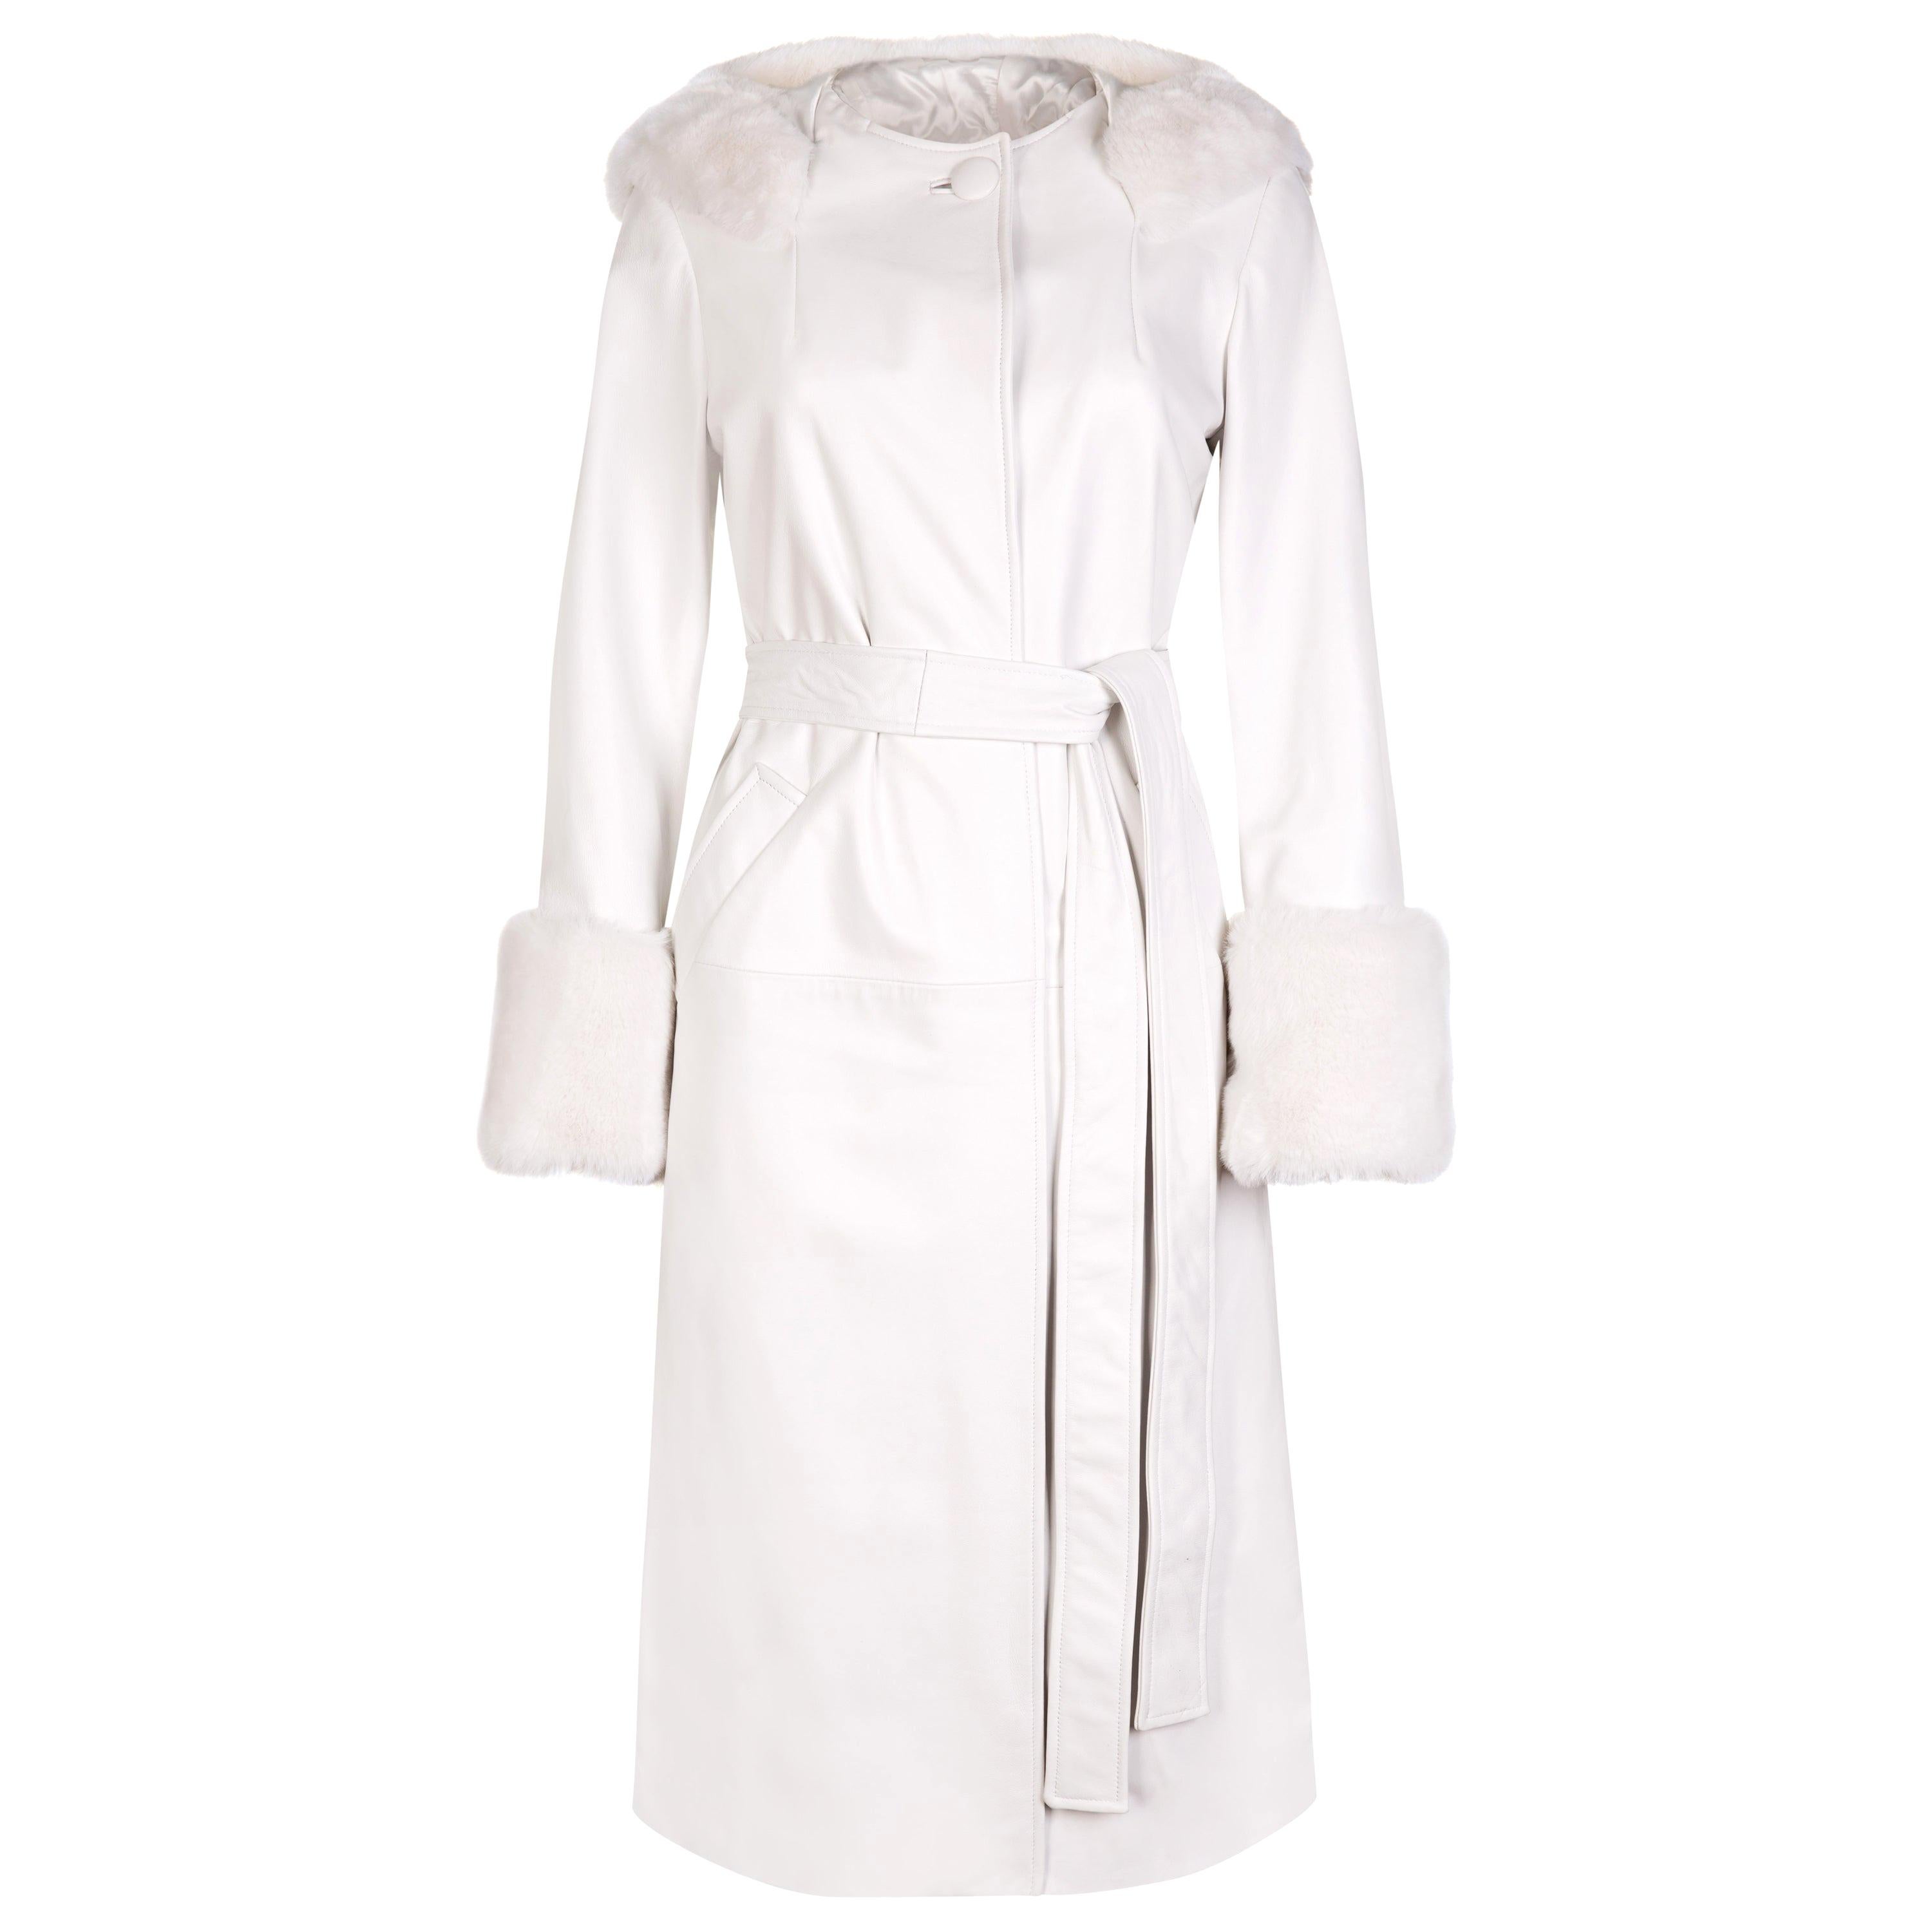 Verheyen Aurora Hooded Leather Trench Coat in White with Faux Fur - Size uk 8 For Sale